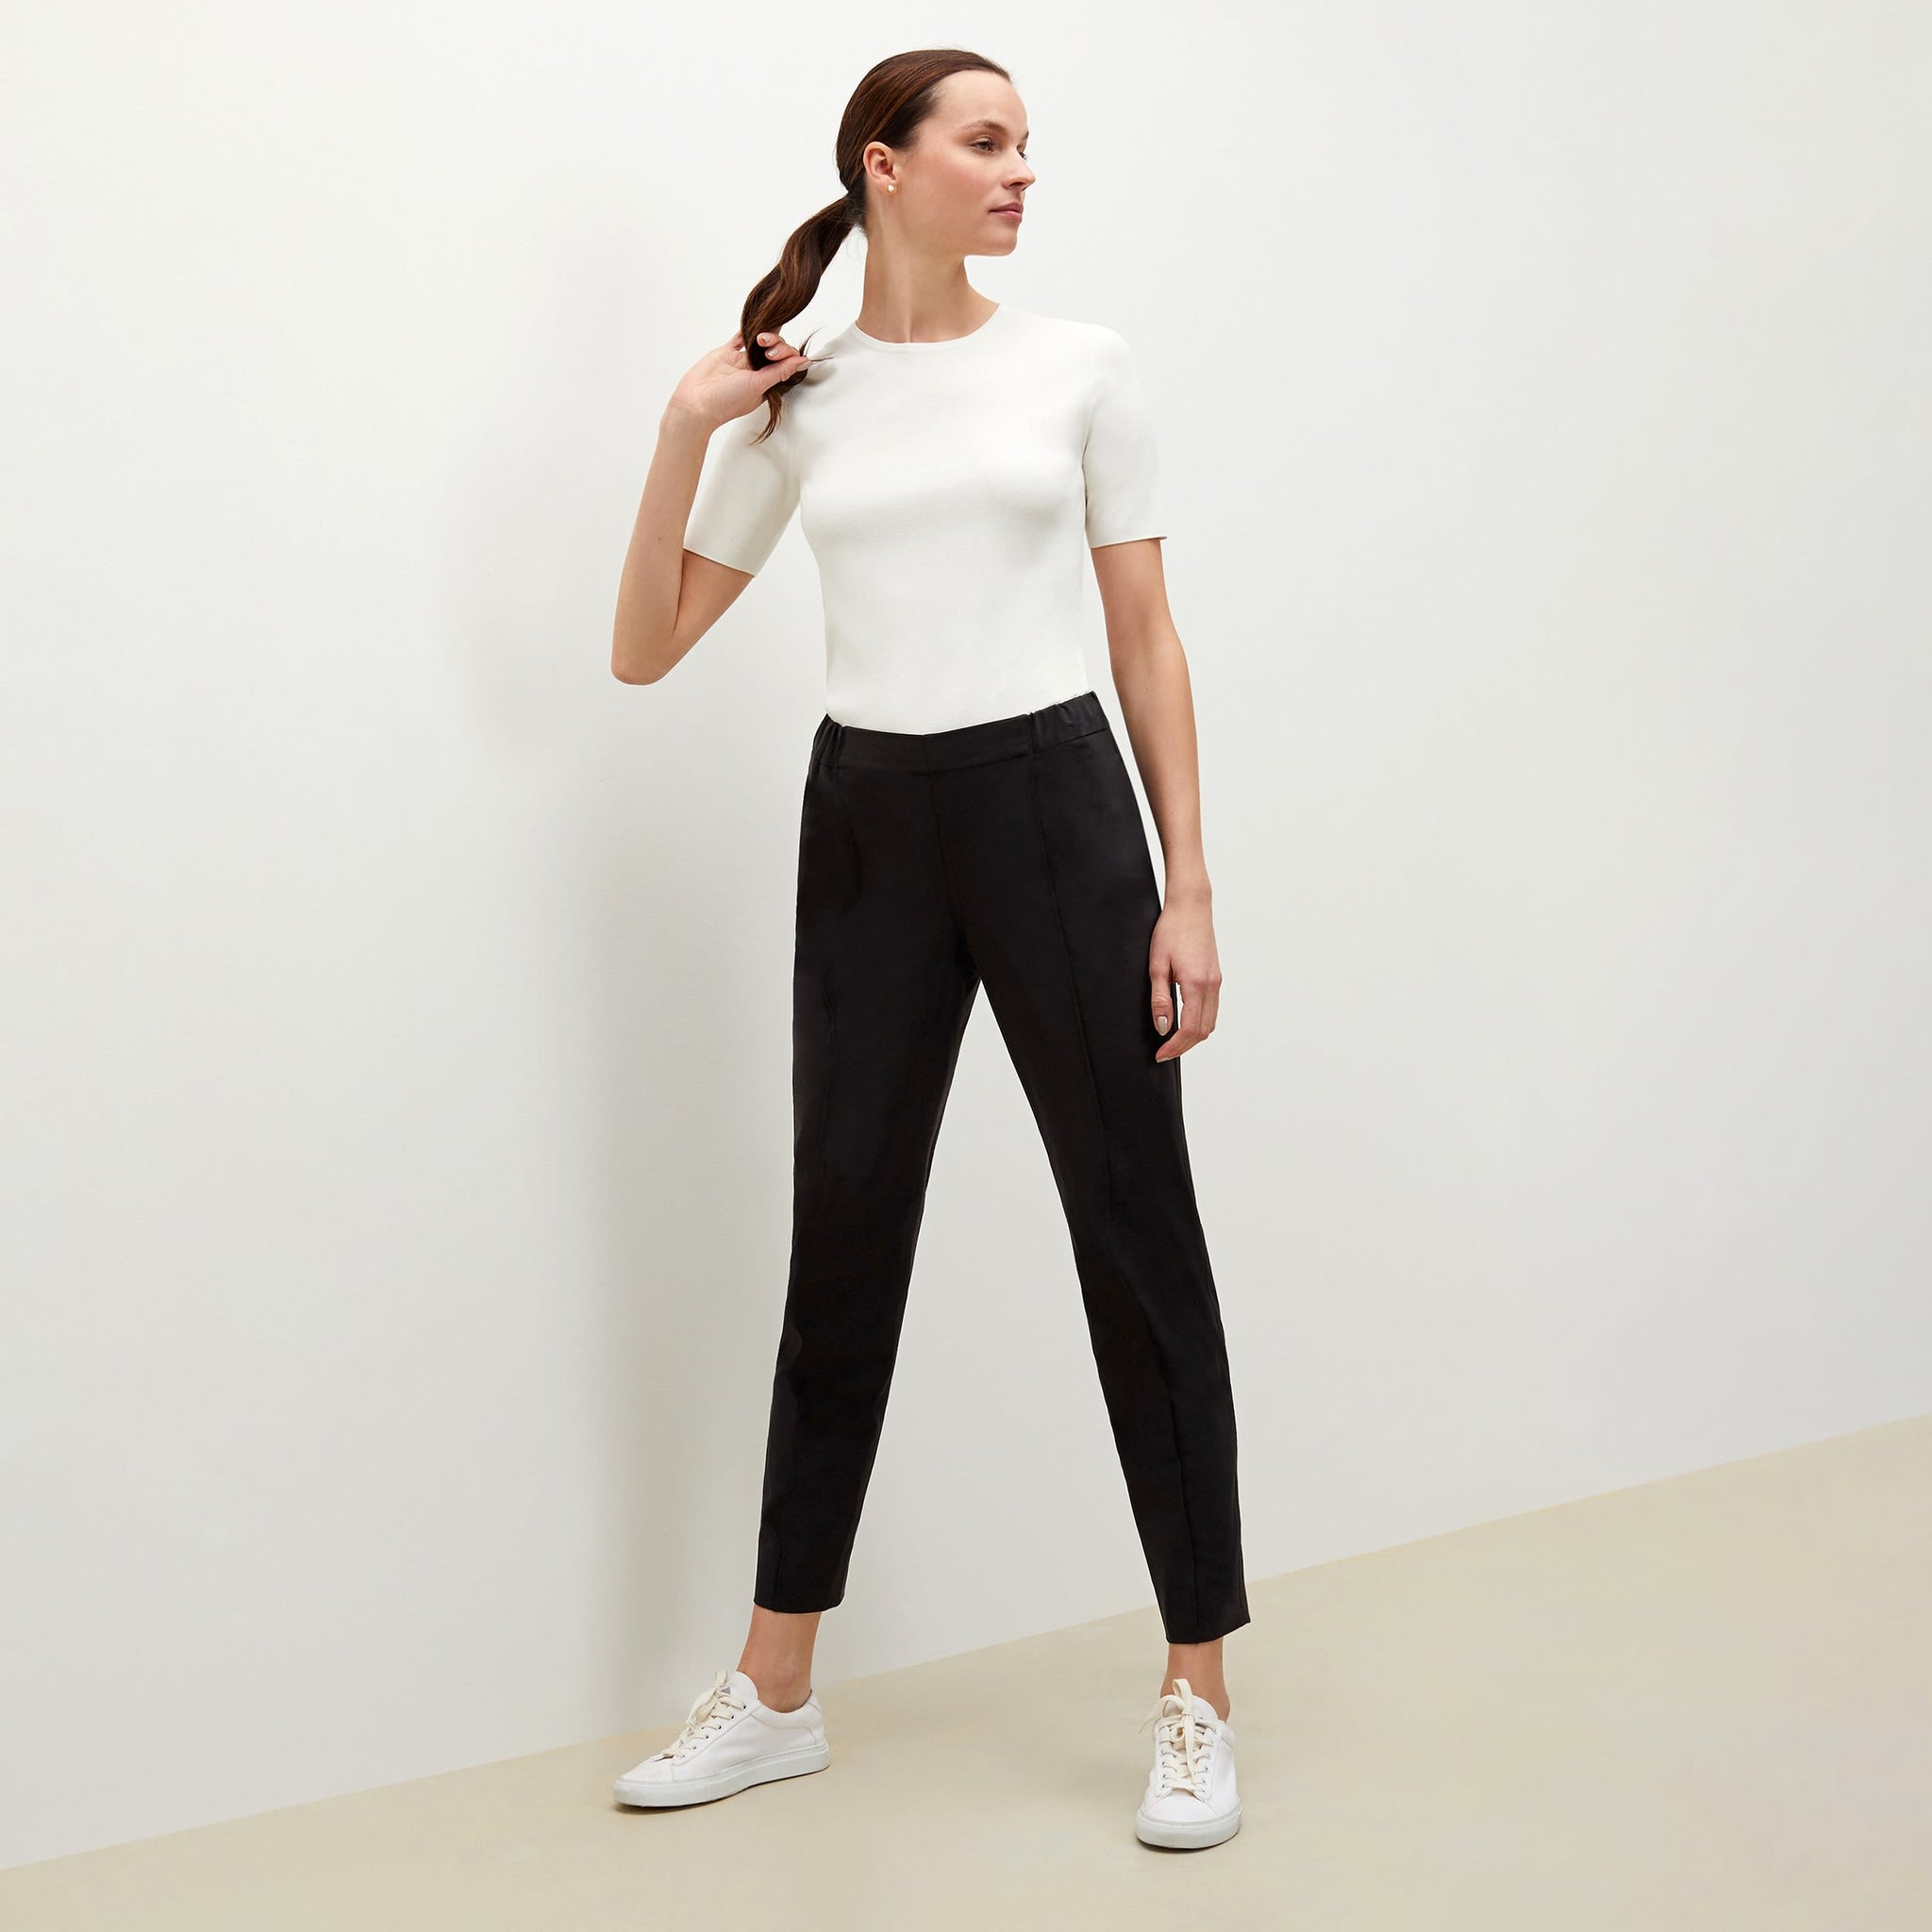 Side image of a woman standing wearing the Colby Jogger in Black